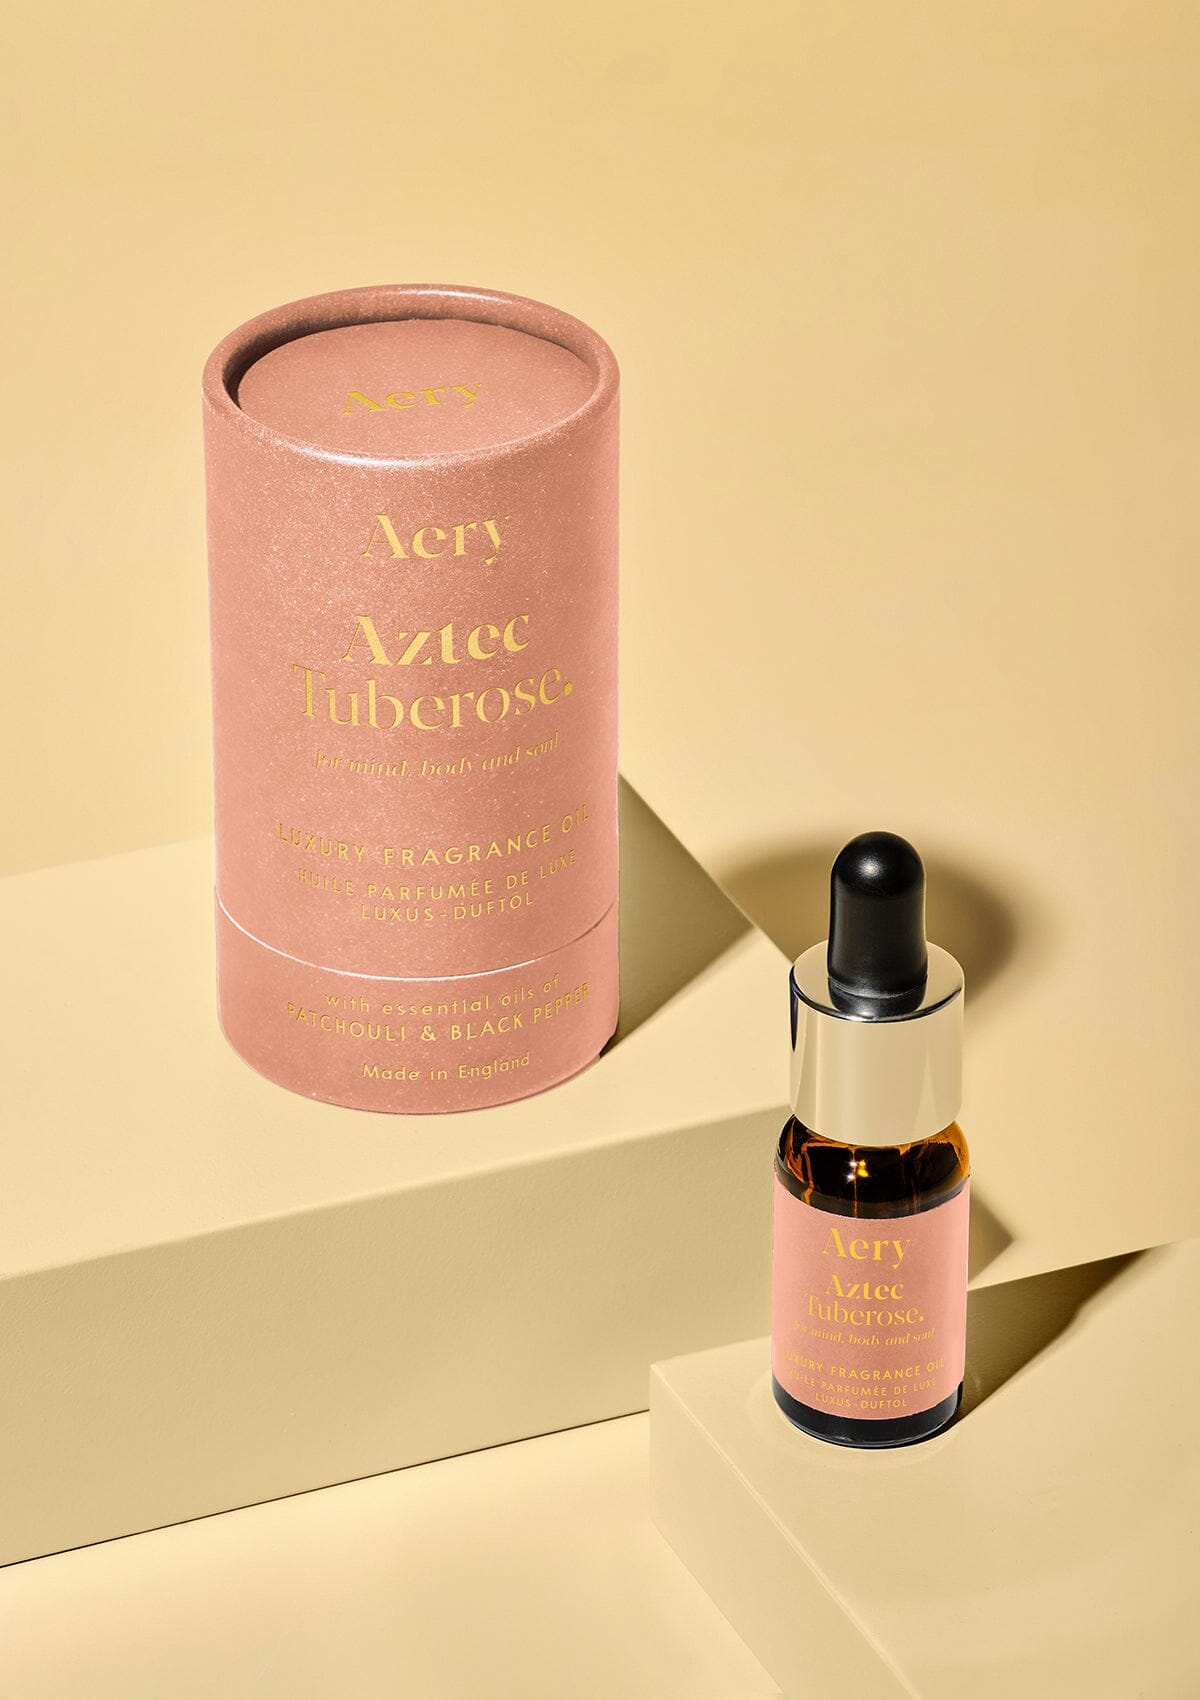 Pink Aztec Tuberose fragrance oil by aery displayed next to product packaging on yellow background 